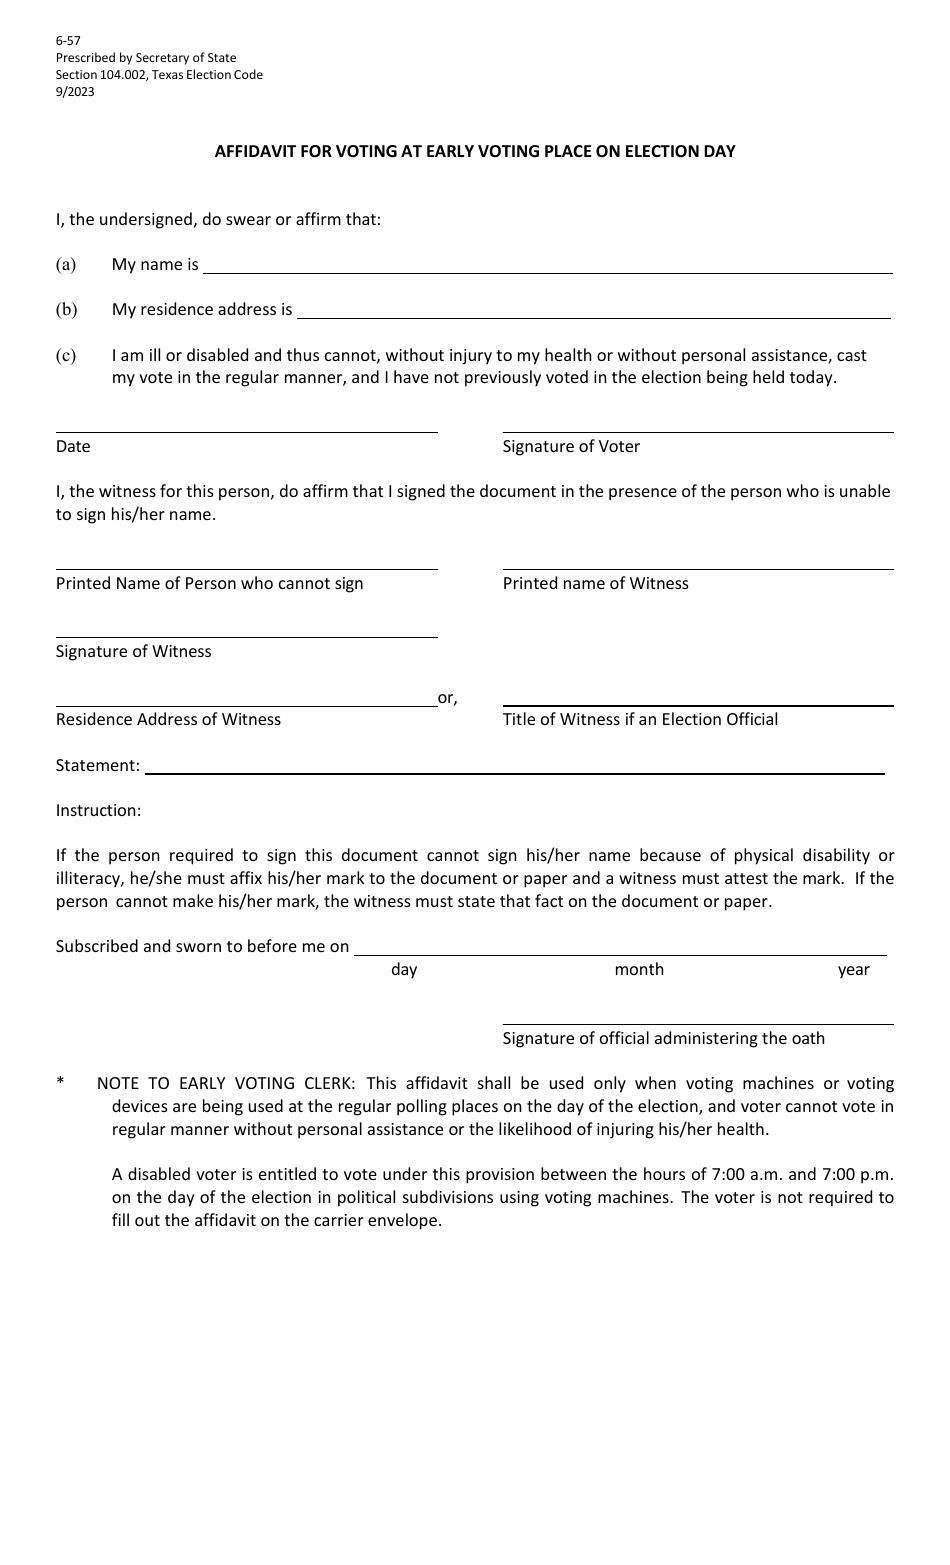 Form 6-57 Affidavit for Voting at Early Voting Place on Election Day - Texas (English / Spanish), Page 1